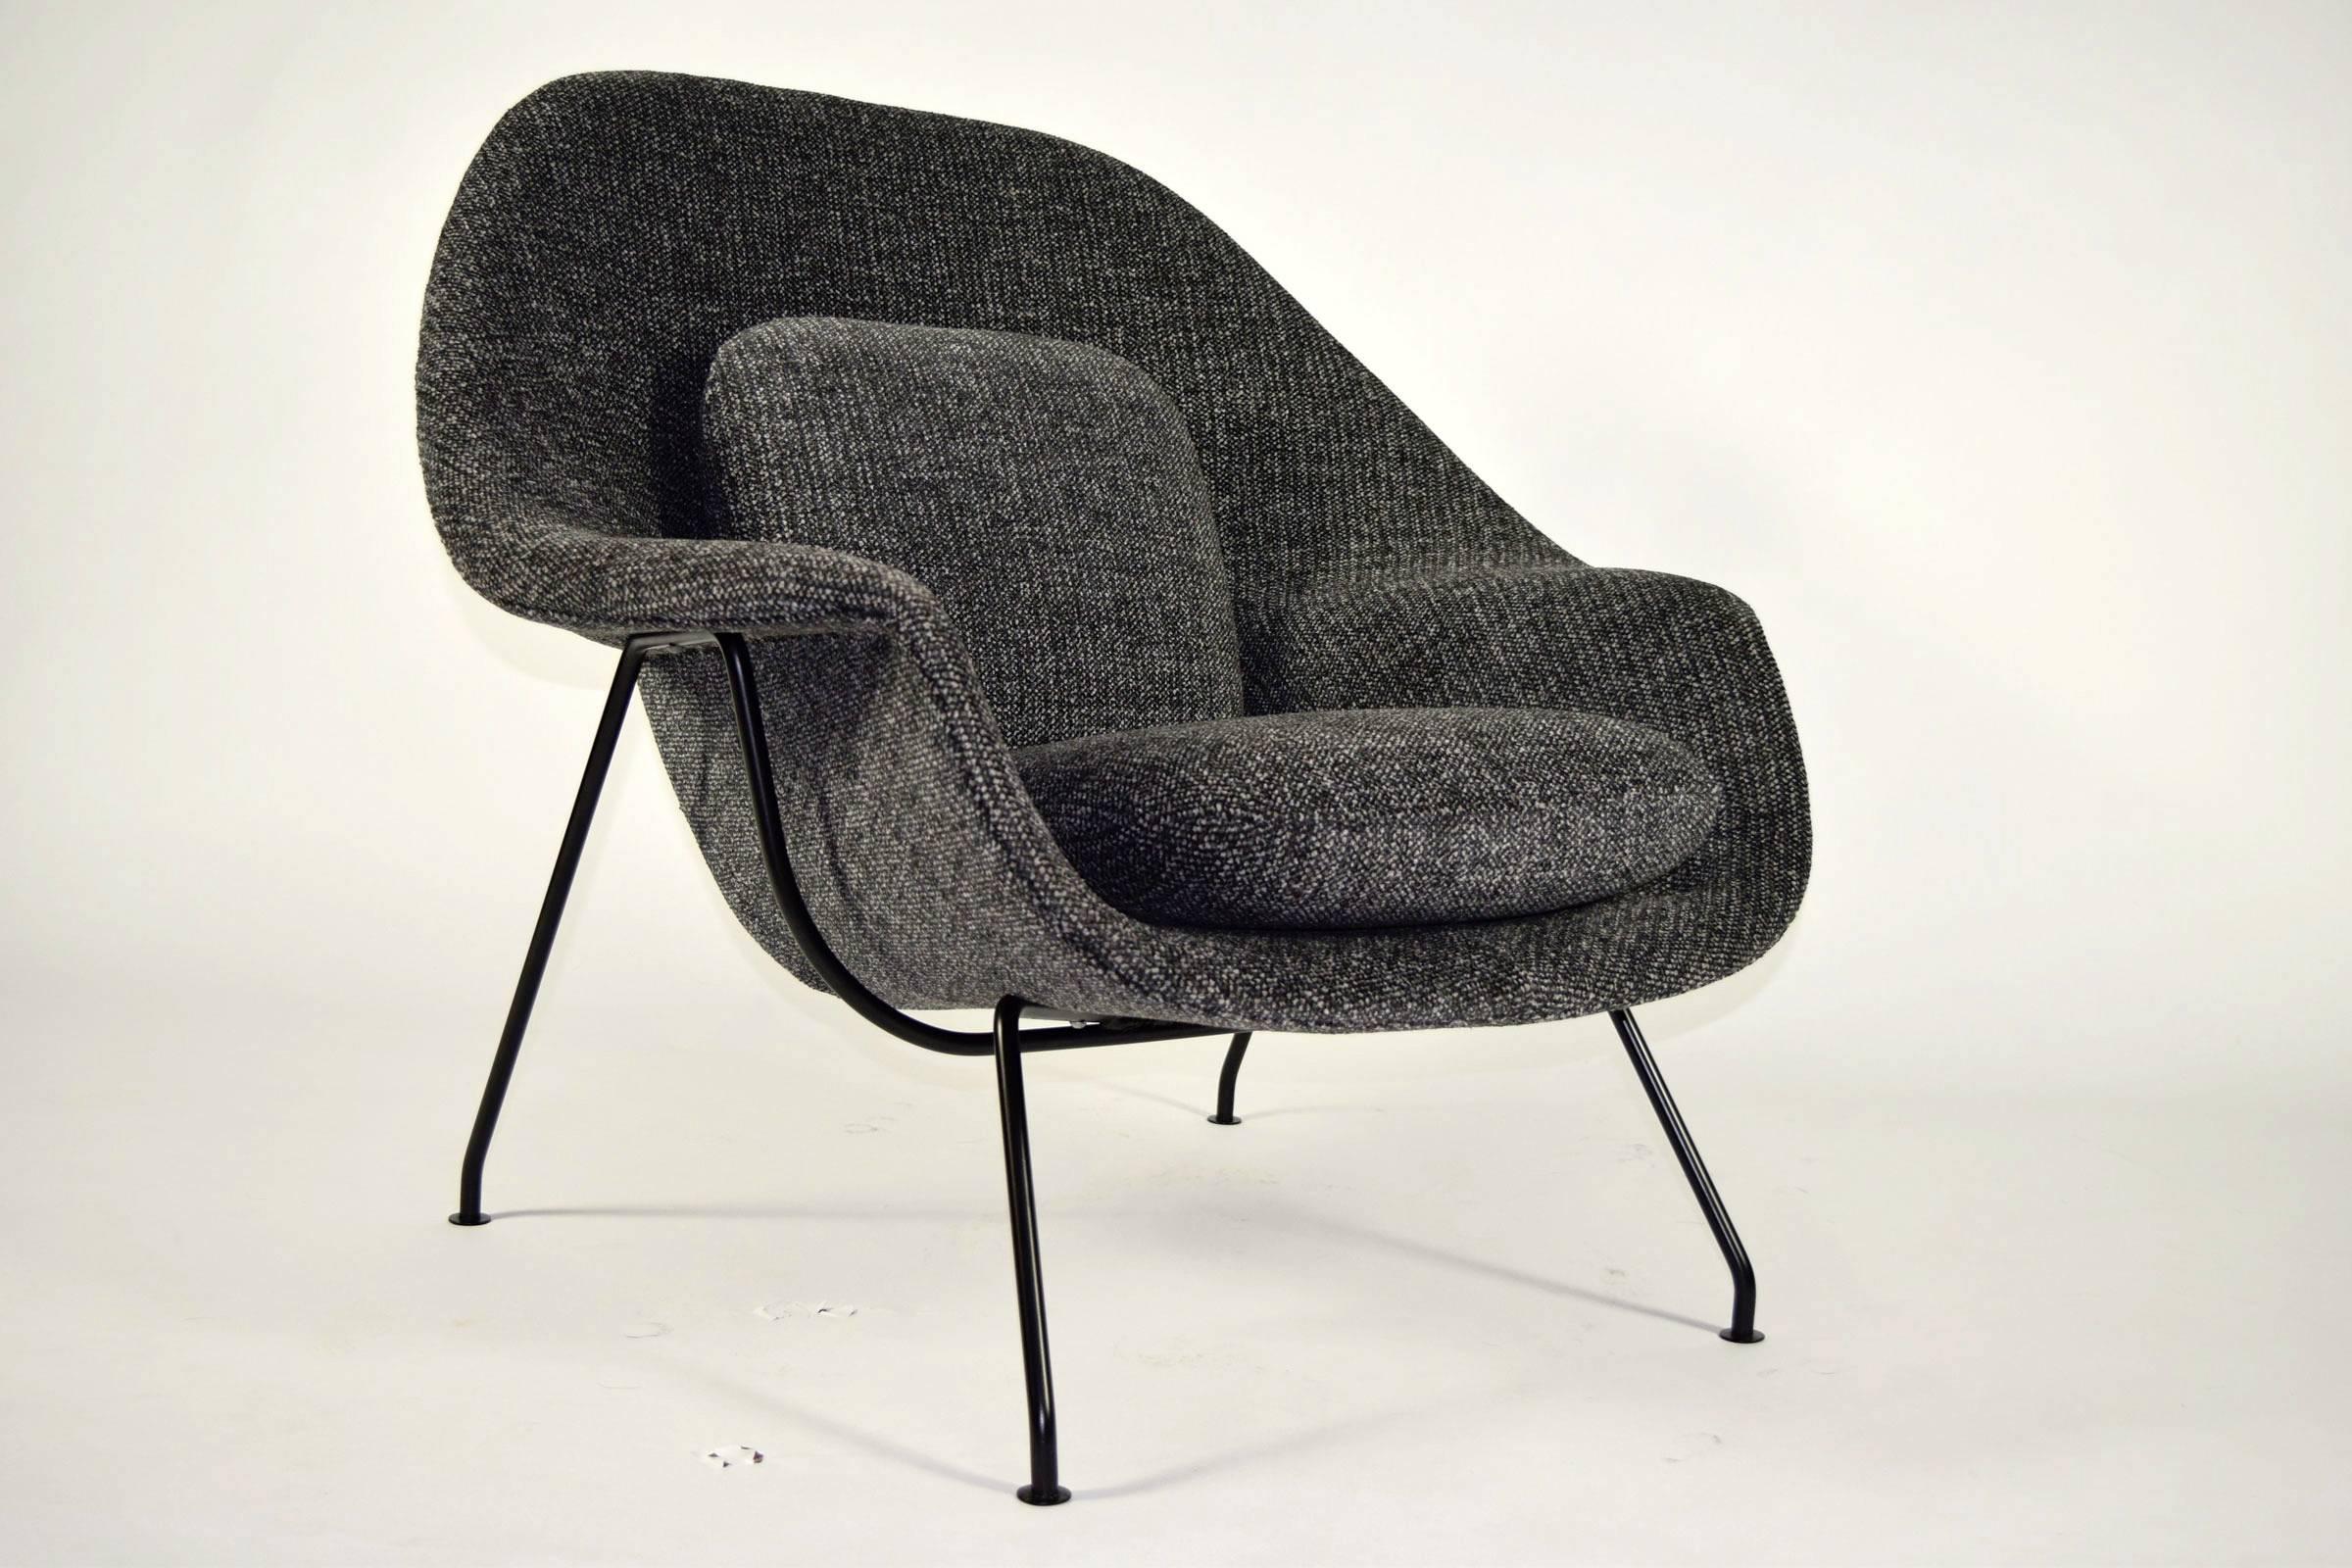 Newly upholstered Eero Saarinen's Womb chair for Knoll. Holly Hunt Great Outdoors "Twilight Run". It feels like a chenille !!! Stunning !